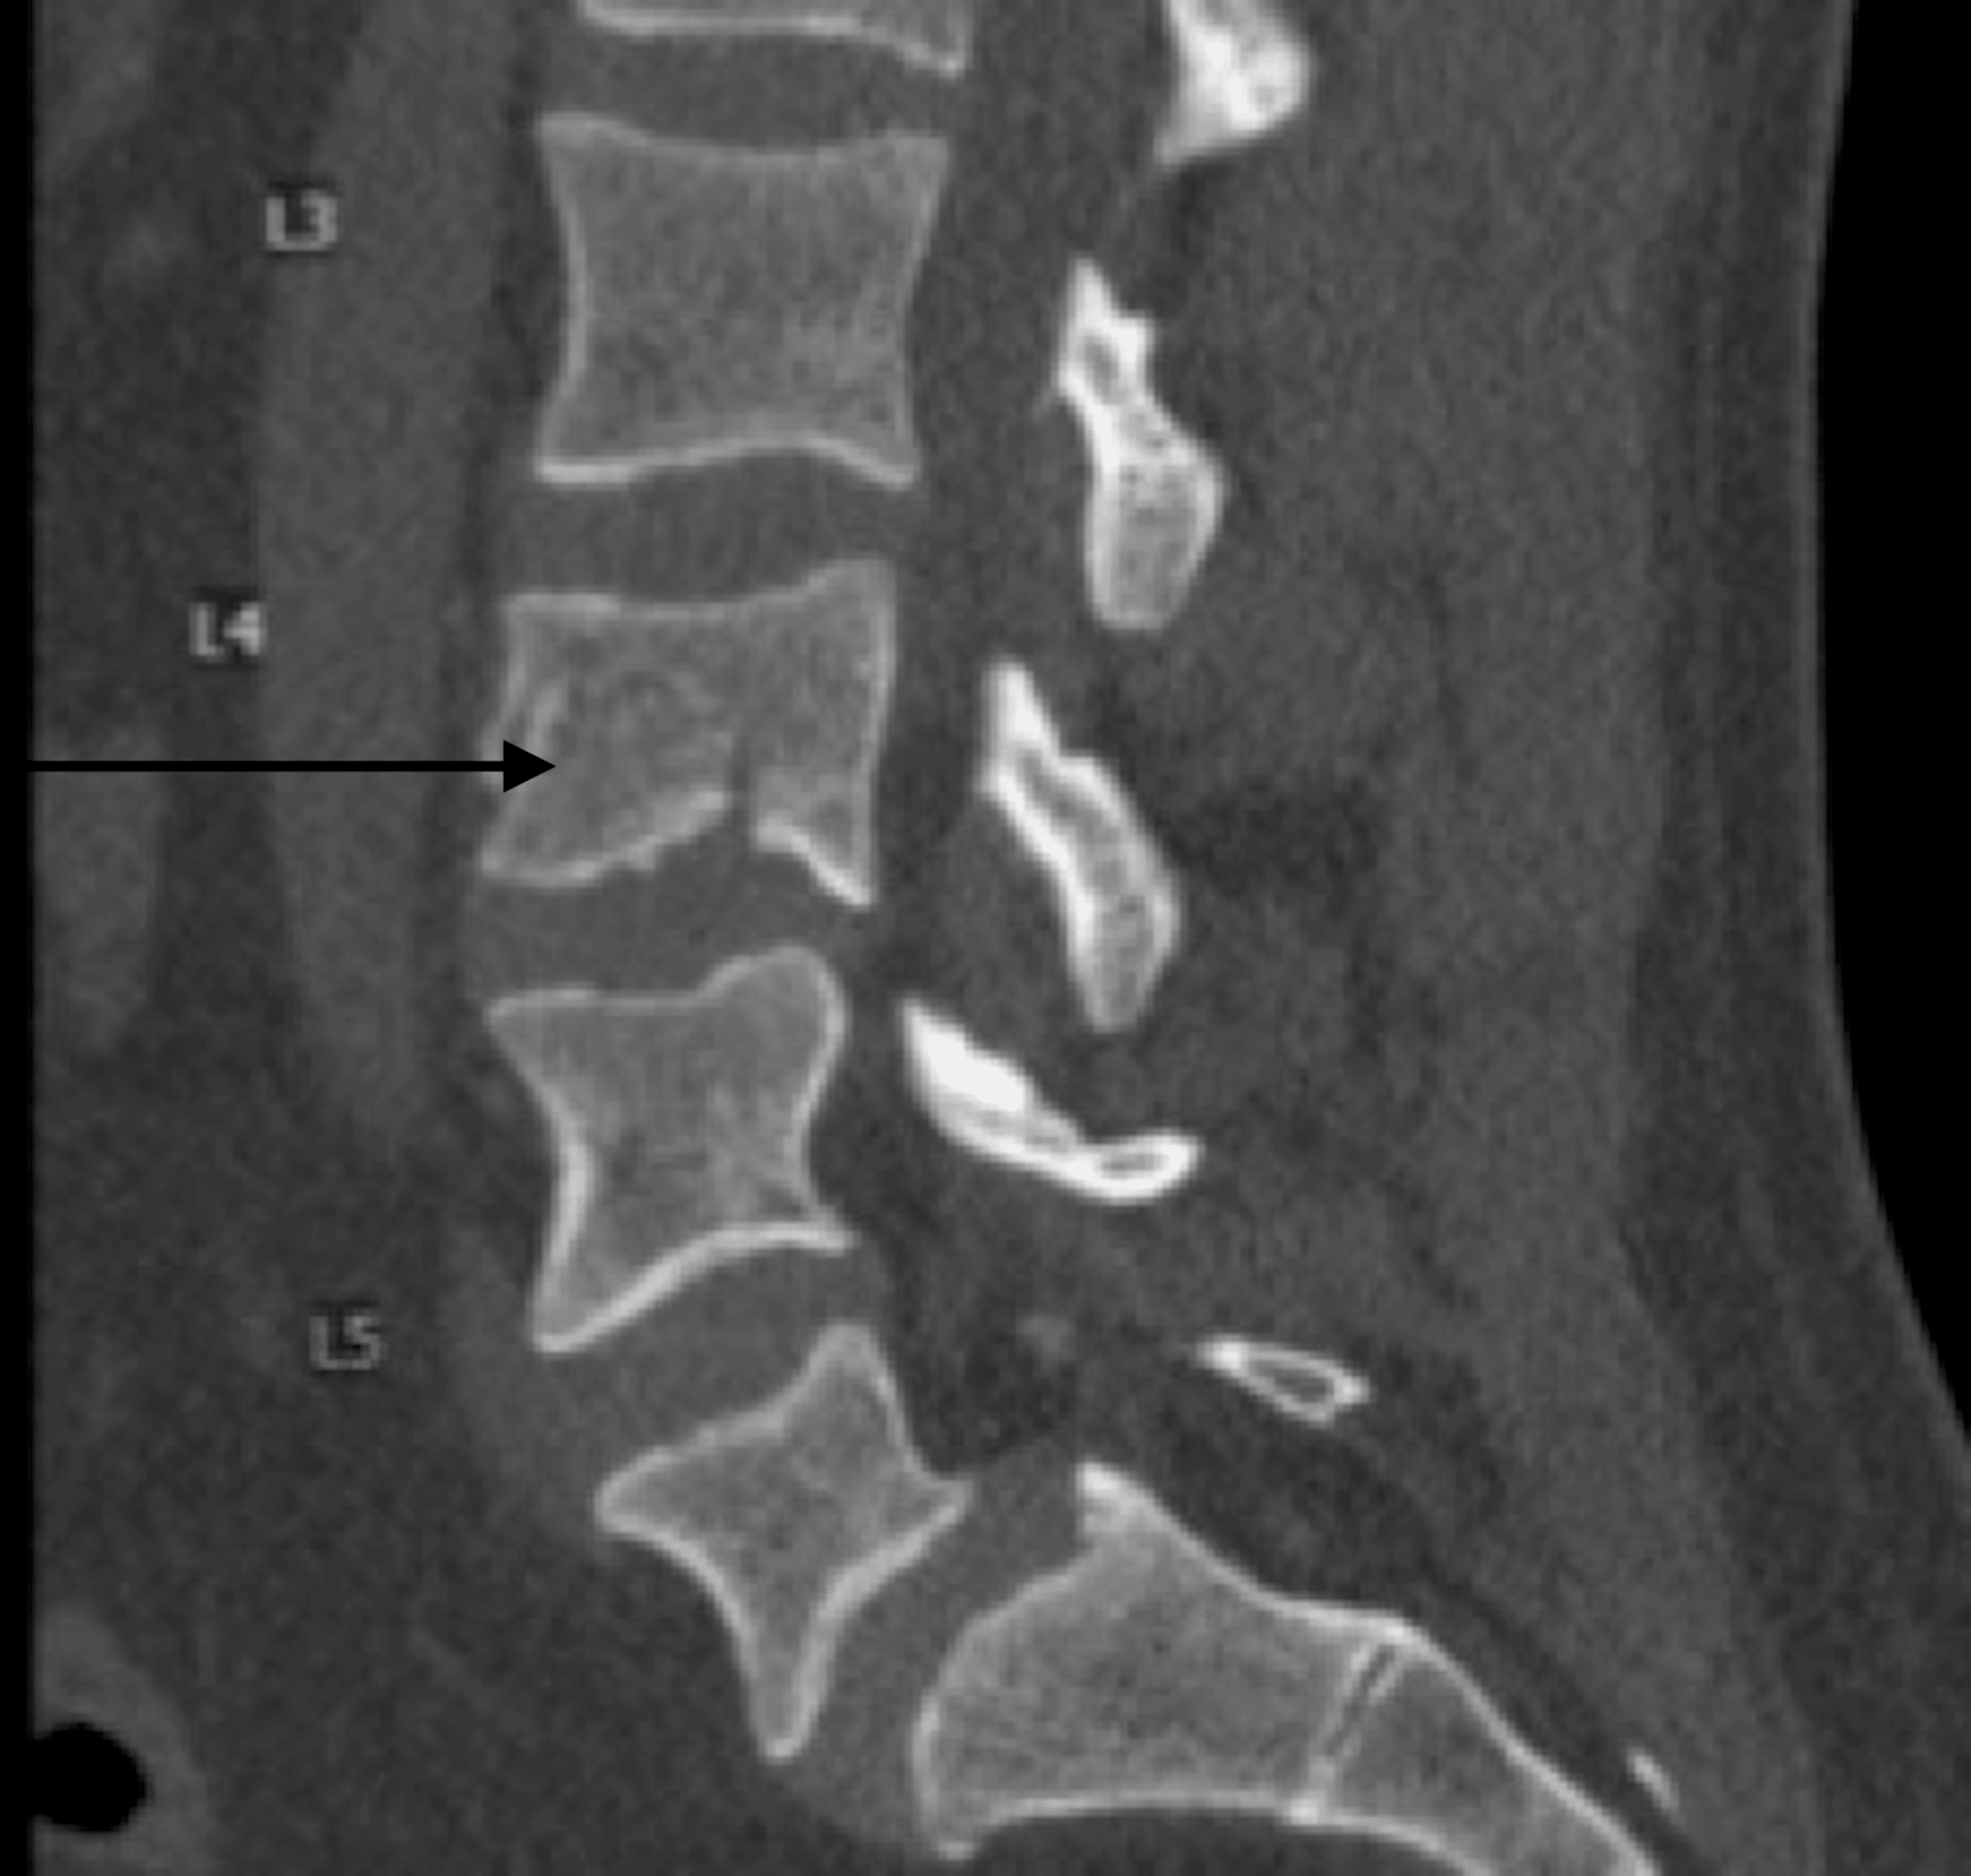 Cureus Nonoperative Management In Intact Burst Fracture Patient With Thoracolumbar Injury